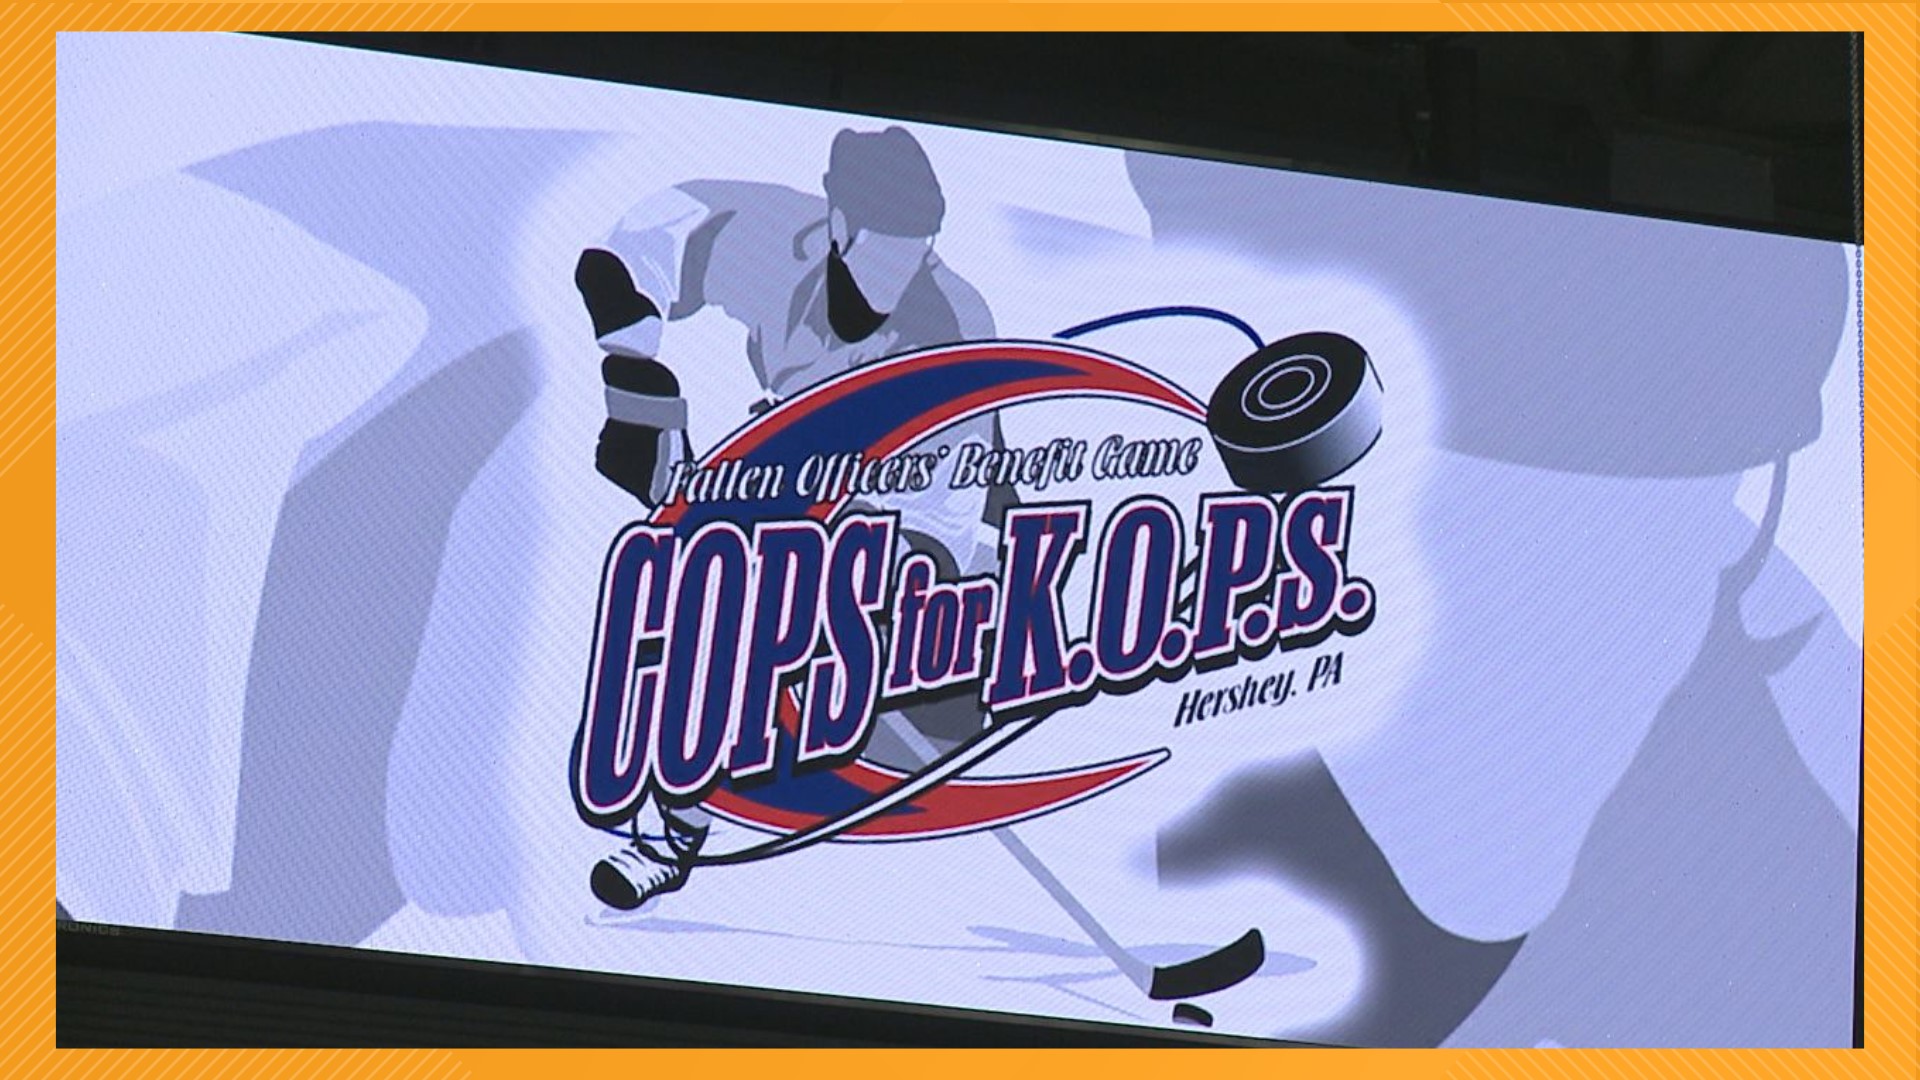 Police officers from Pennsylvania and beyond will play ice hockey at GIANT Center to raise money for the families of fallen officers.